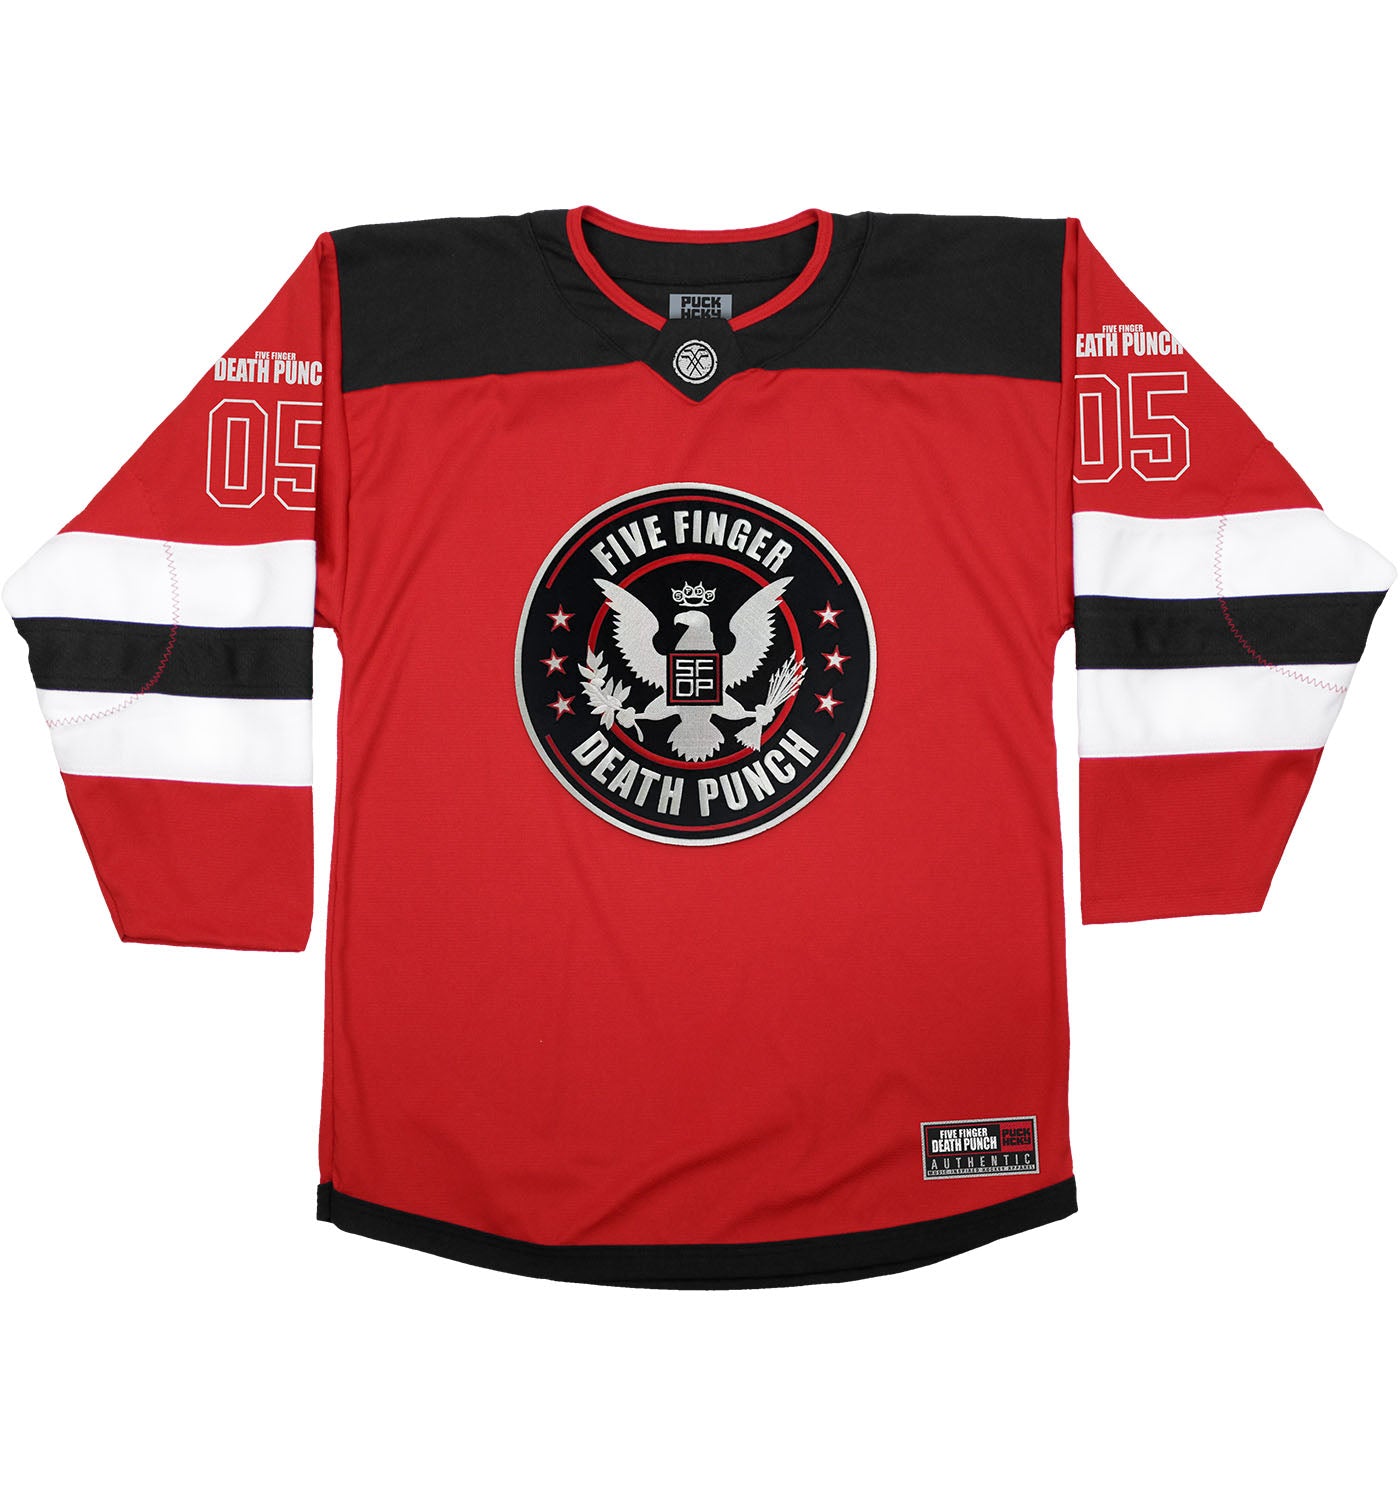 http://puckhcky.com/cdn/shop/files/5fdp-eagle-crest-deluxe-jersey-red-front.jpg?v=1705607150